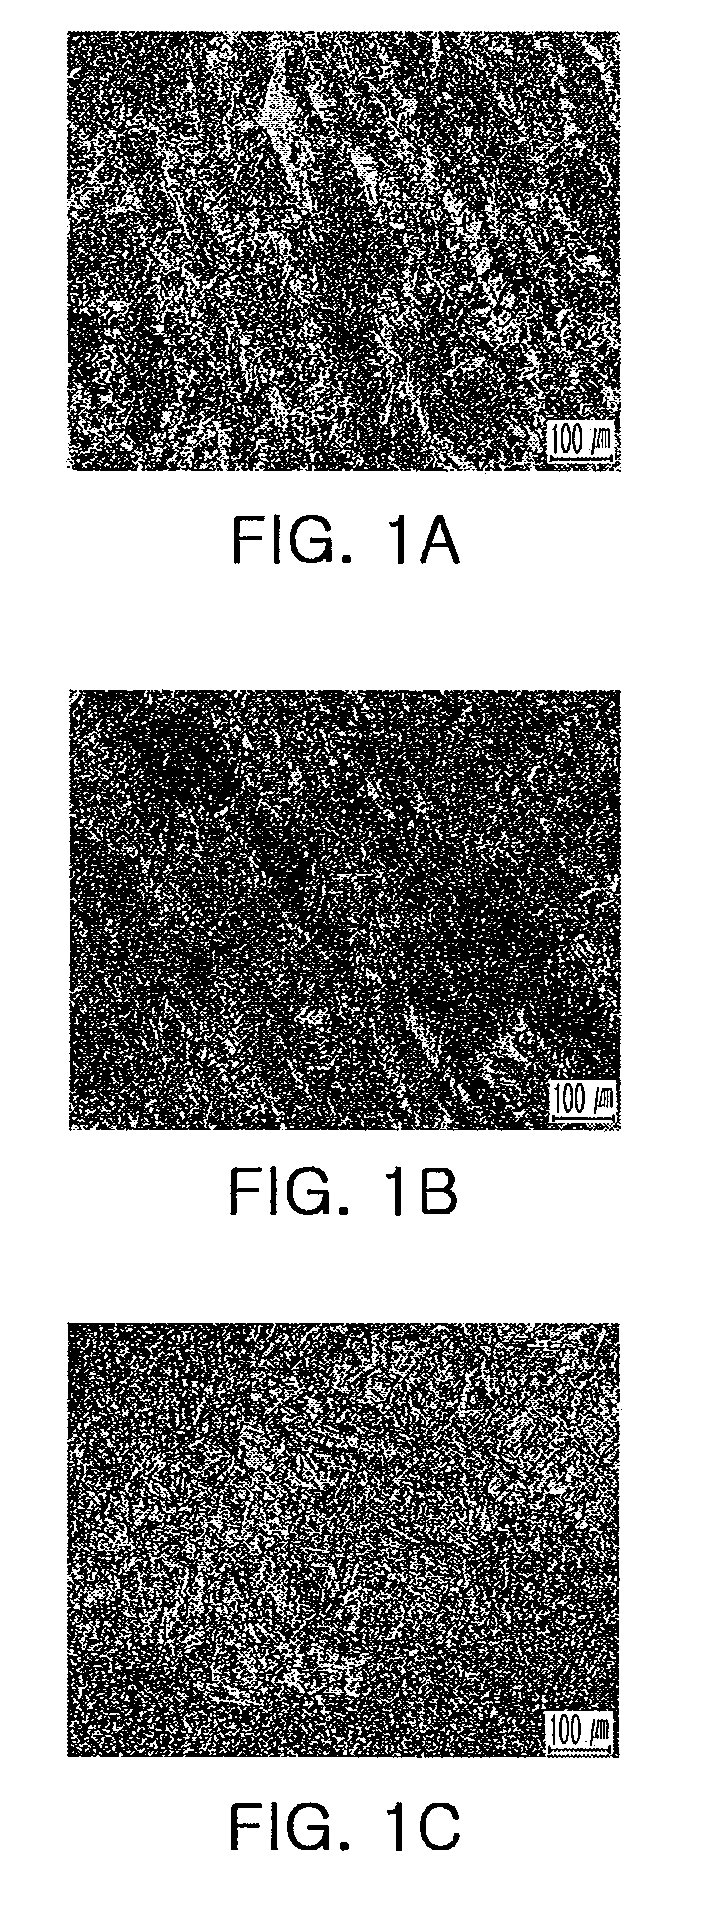 Flux-cored arc welding wire for providing superior toughness and weldability to a welded joint at a low temperature, and welded joint using same